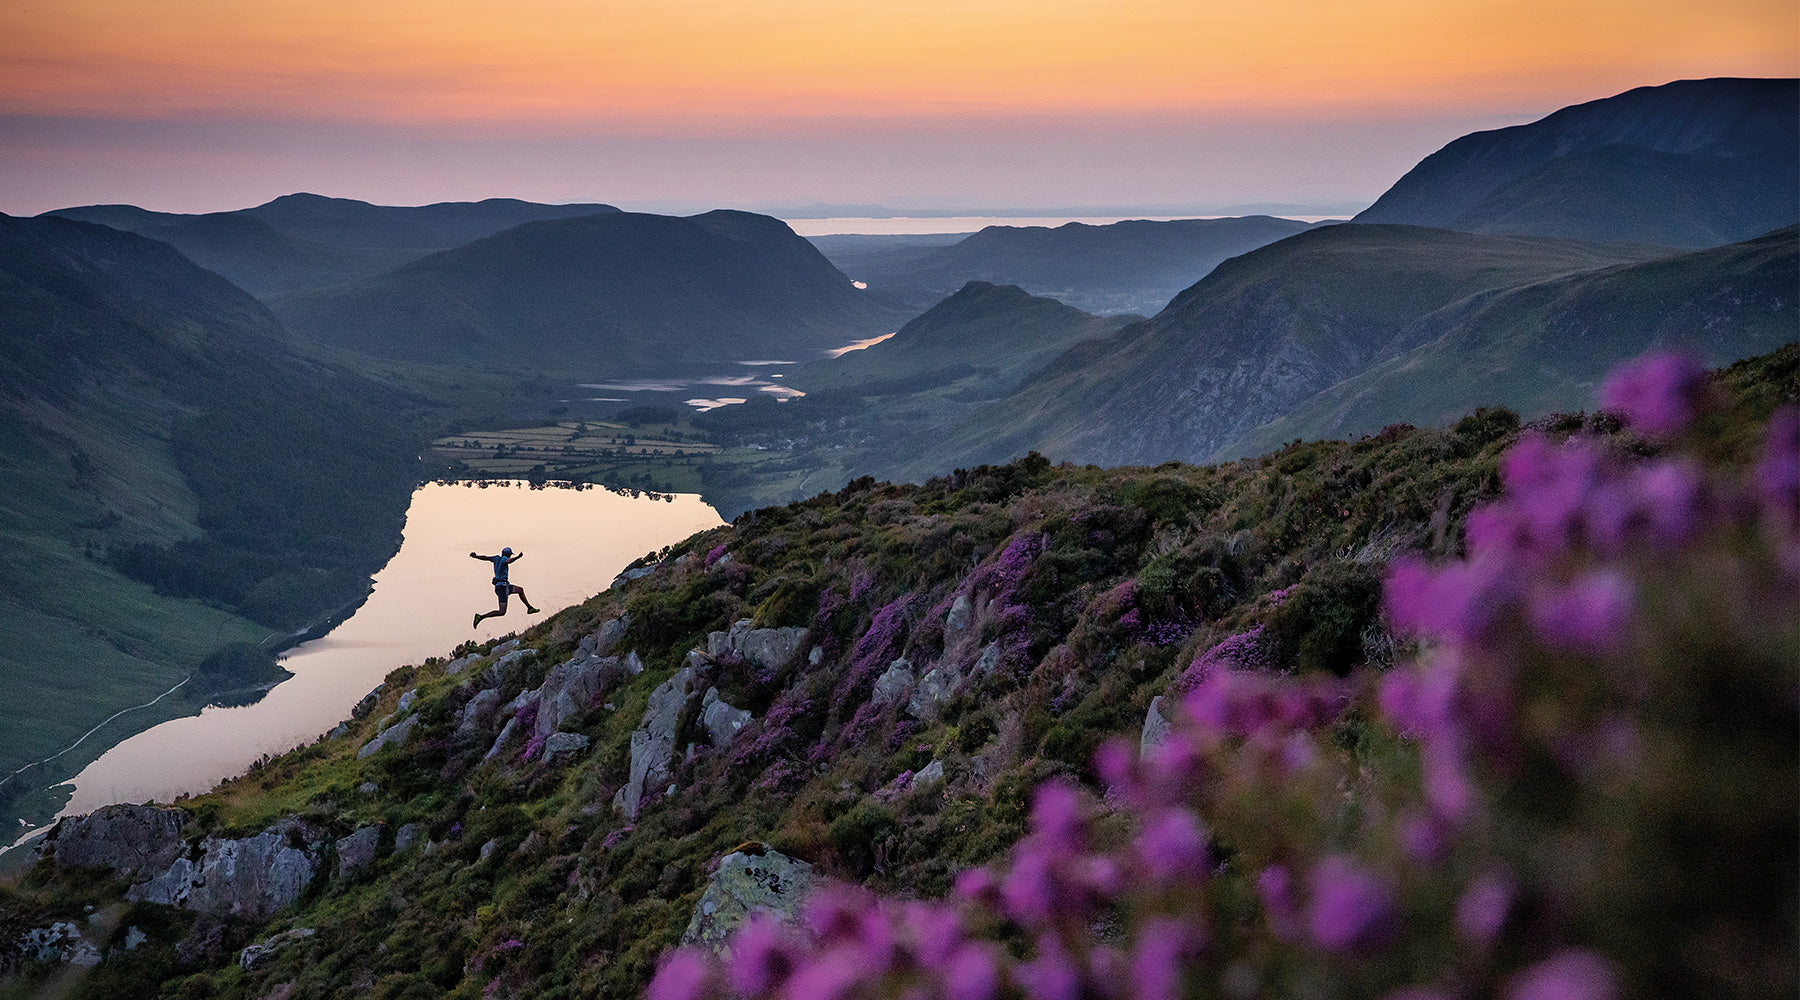 Until Wednesday 31 August, we’re offering up to 70% off a huge range of our award-winning climbing, mountaineering, hillwalking, cycling and off-road running books.